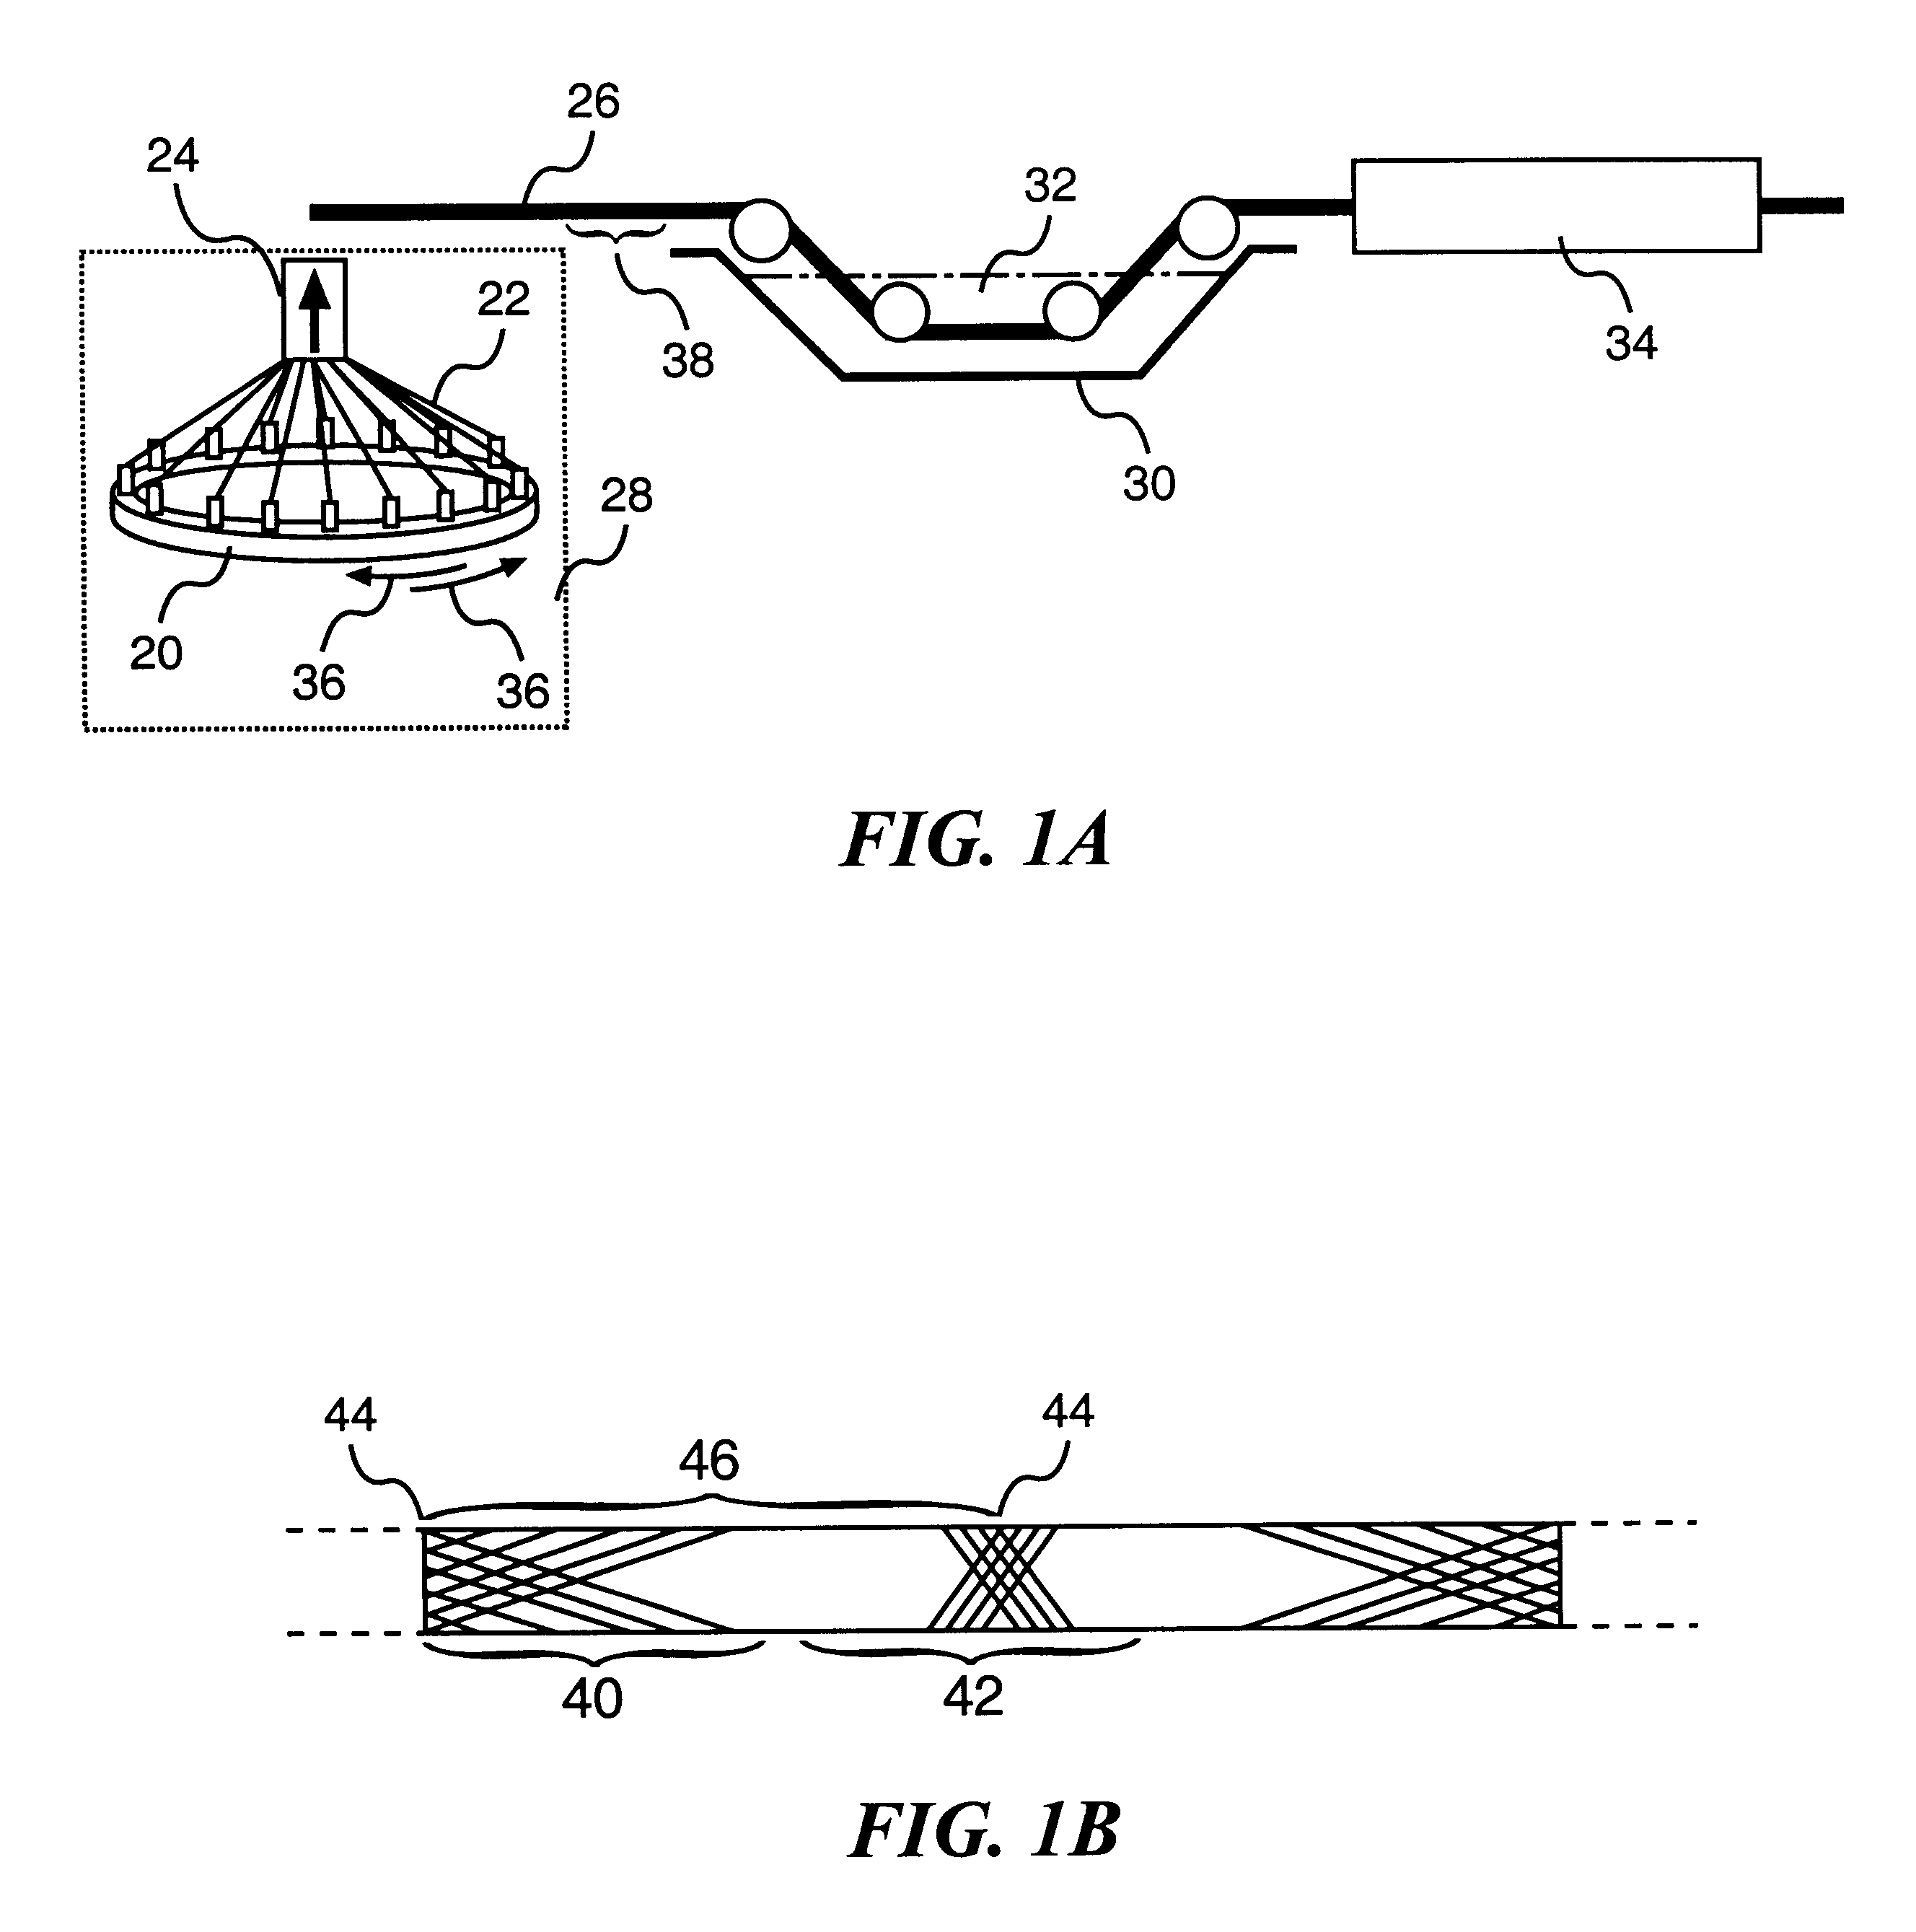 Fiber-reinforced composite product with graded stiffness